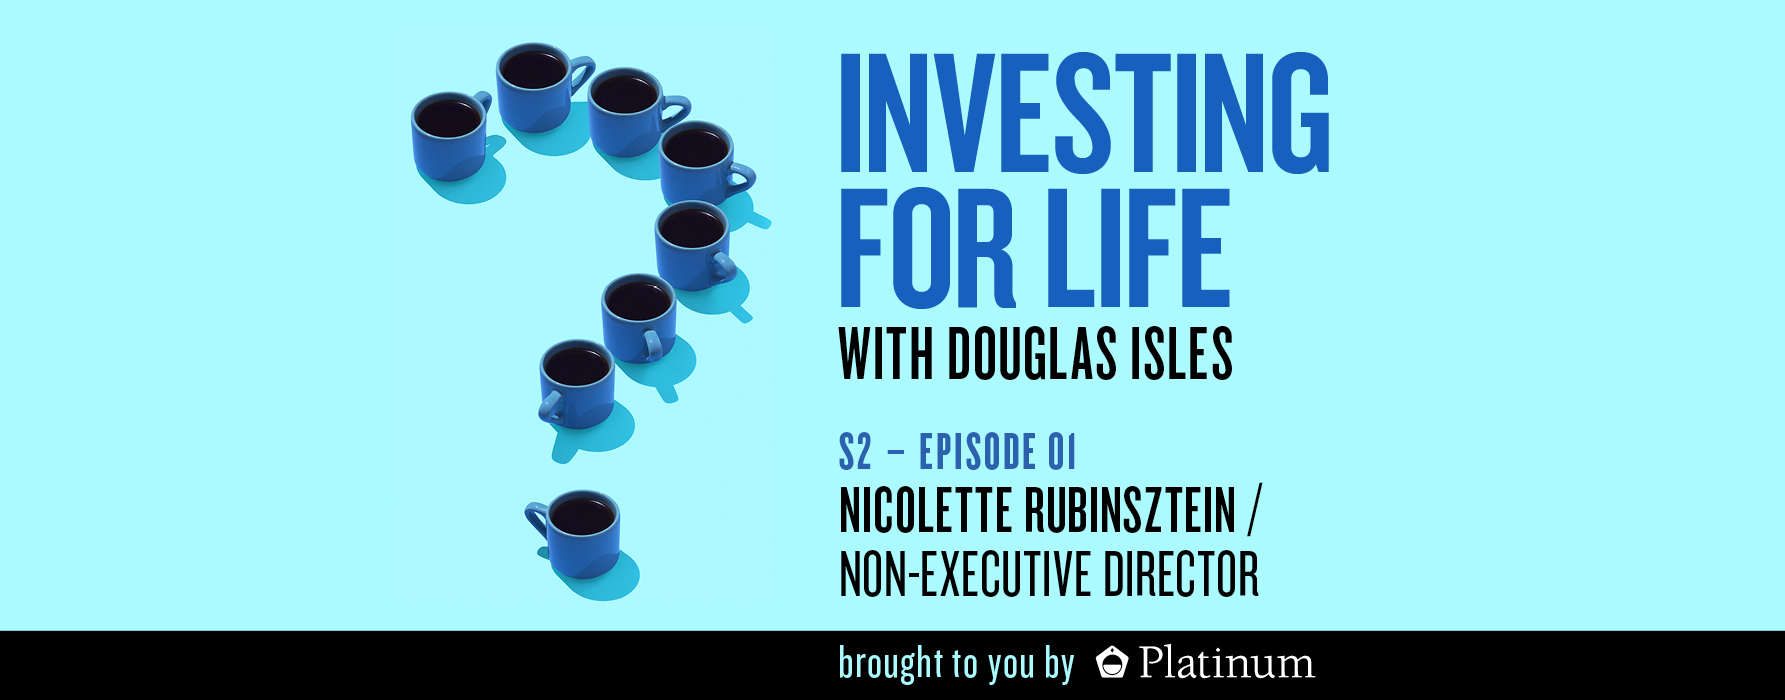 Investing for Life Podcast – Nicolette Rubinsztein, Non-Executive Director